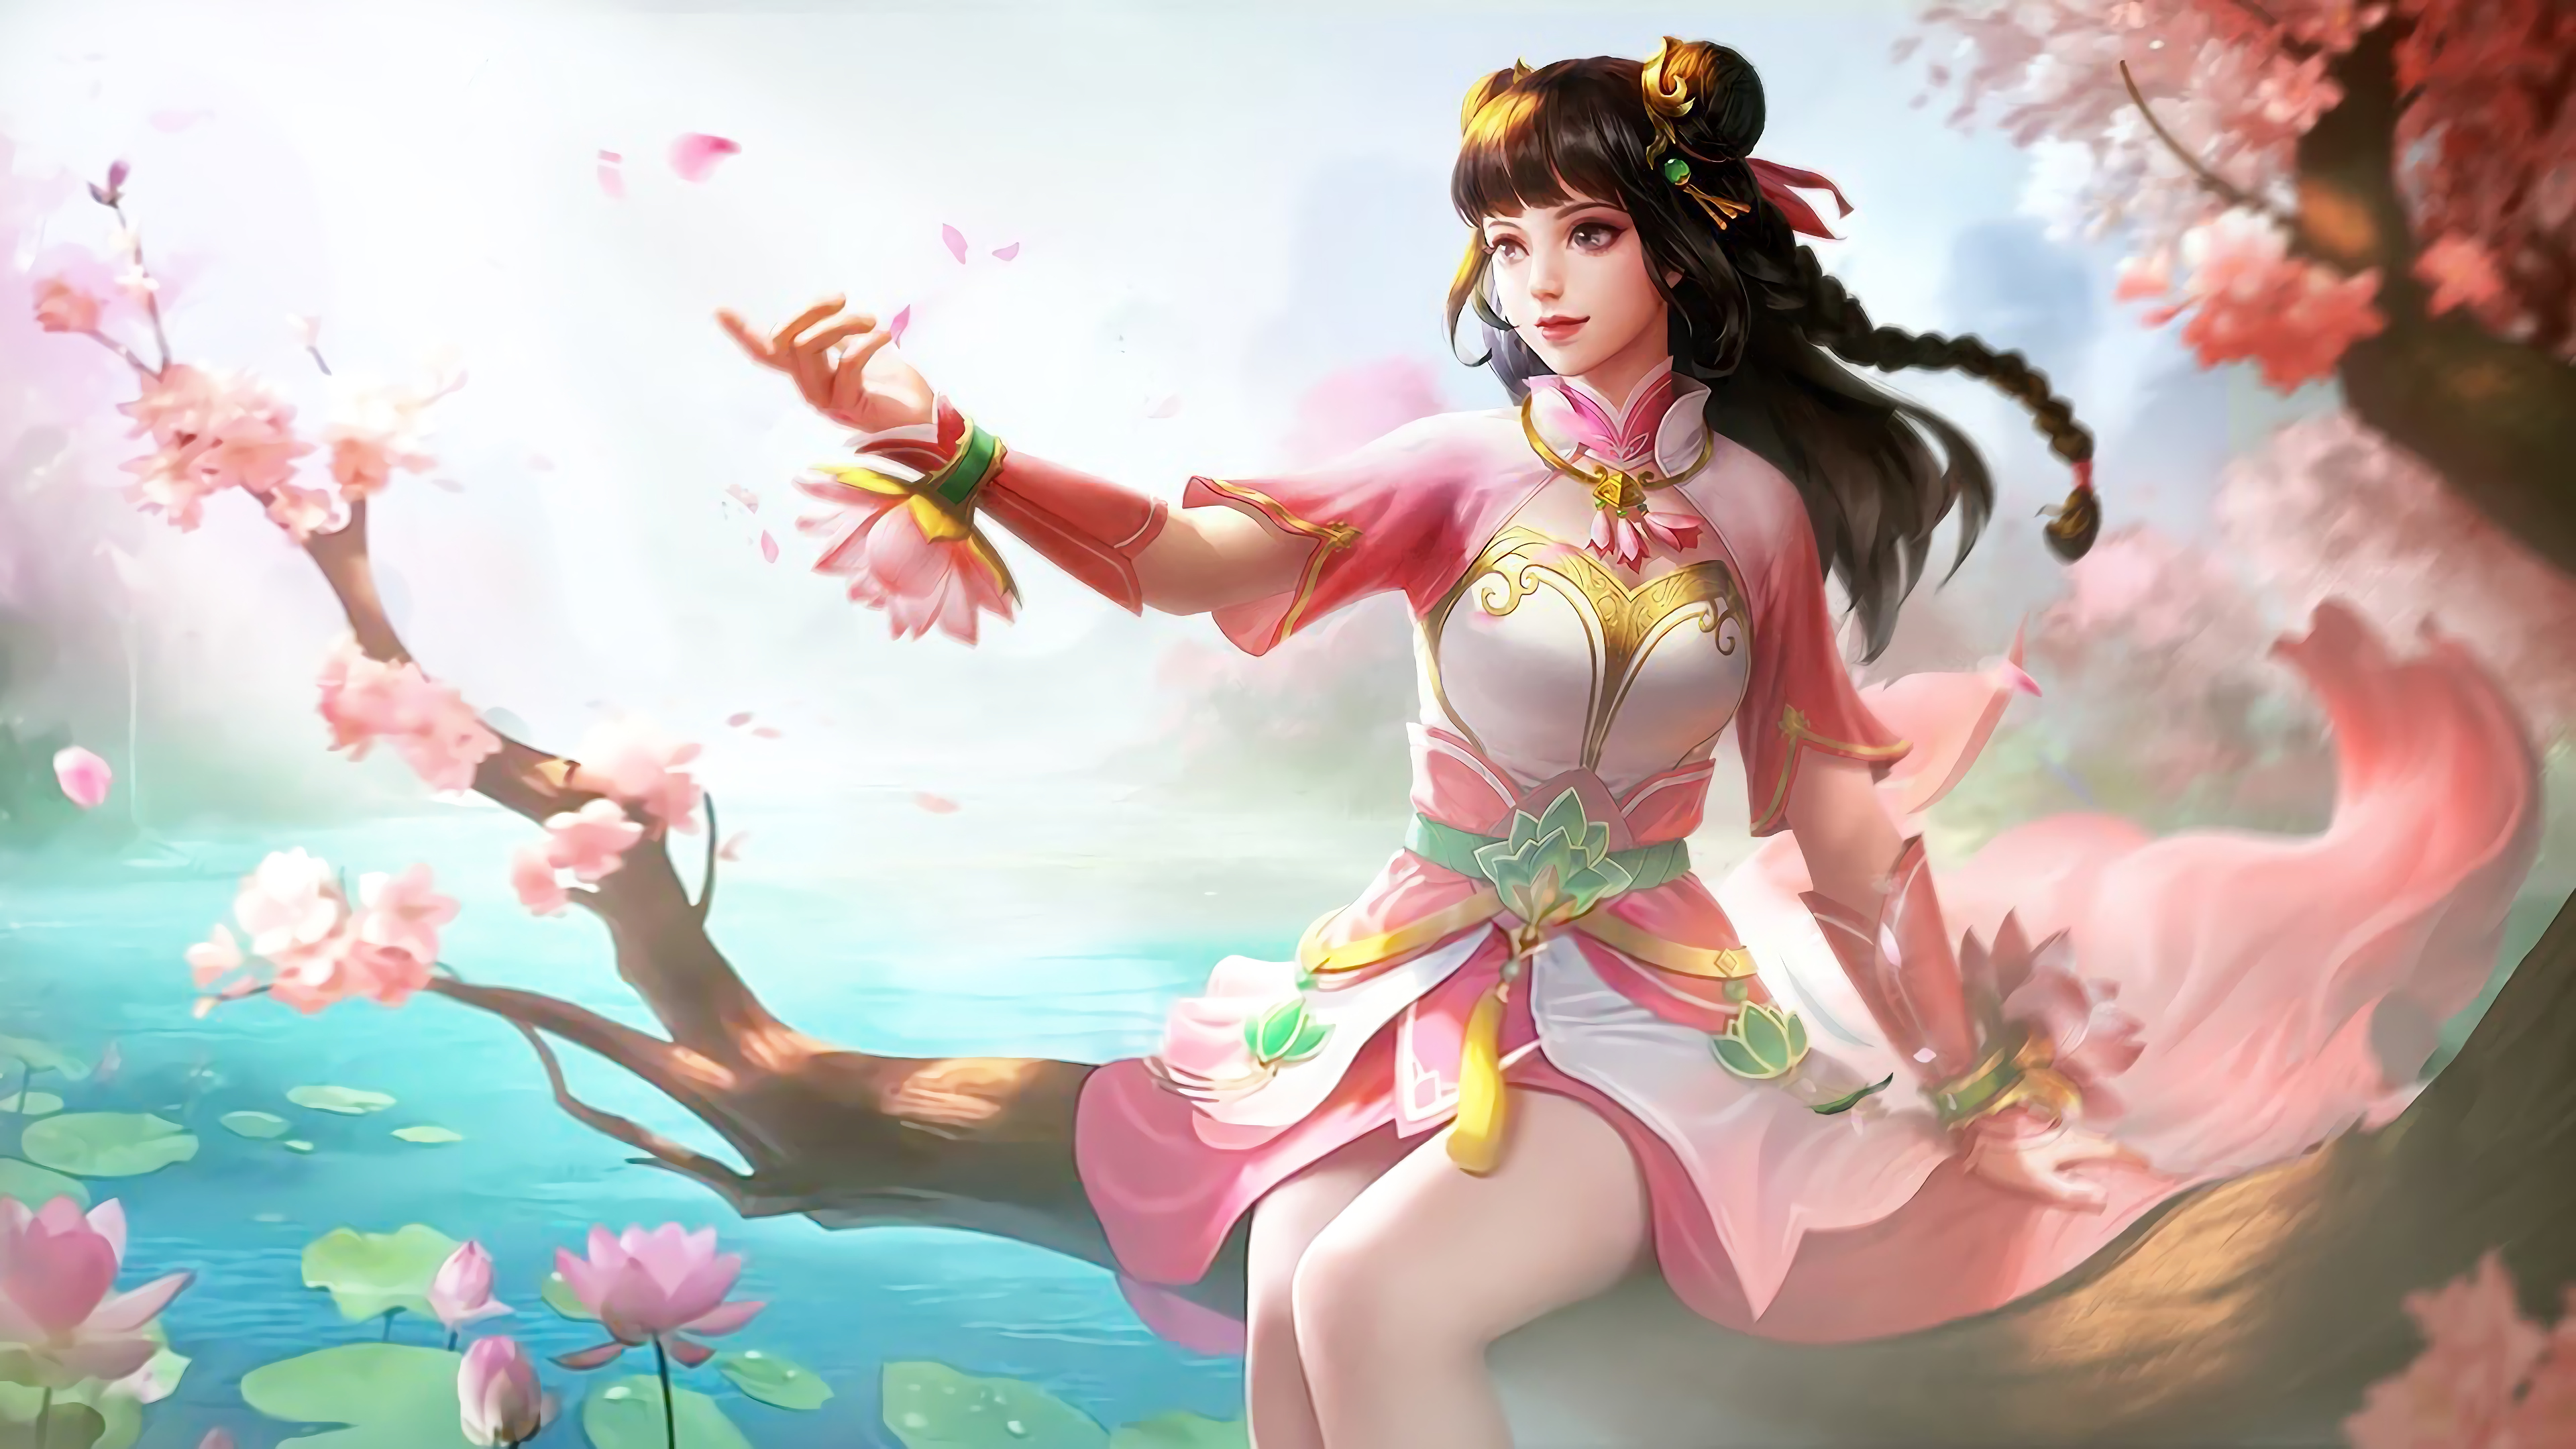 General 3840x2160 Mobile Legends Lotus video games anime video game characters women